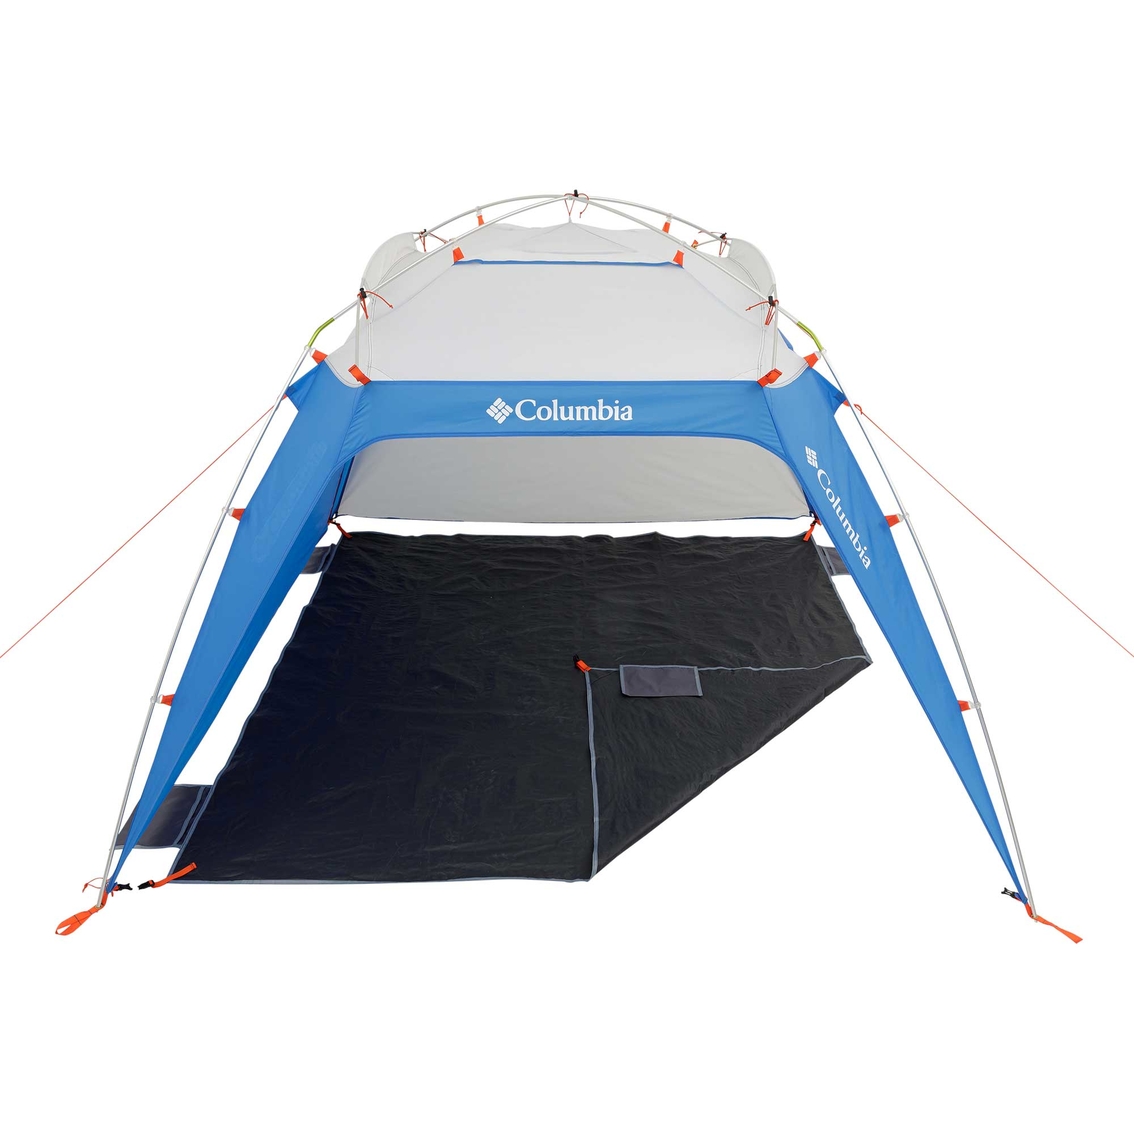 Columbia 8 x 8 ft. Sport Shade - Image 6 of 10